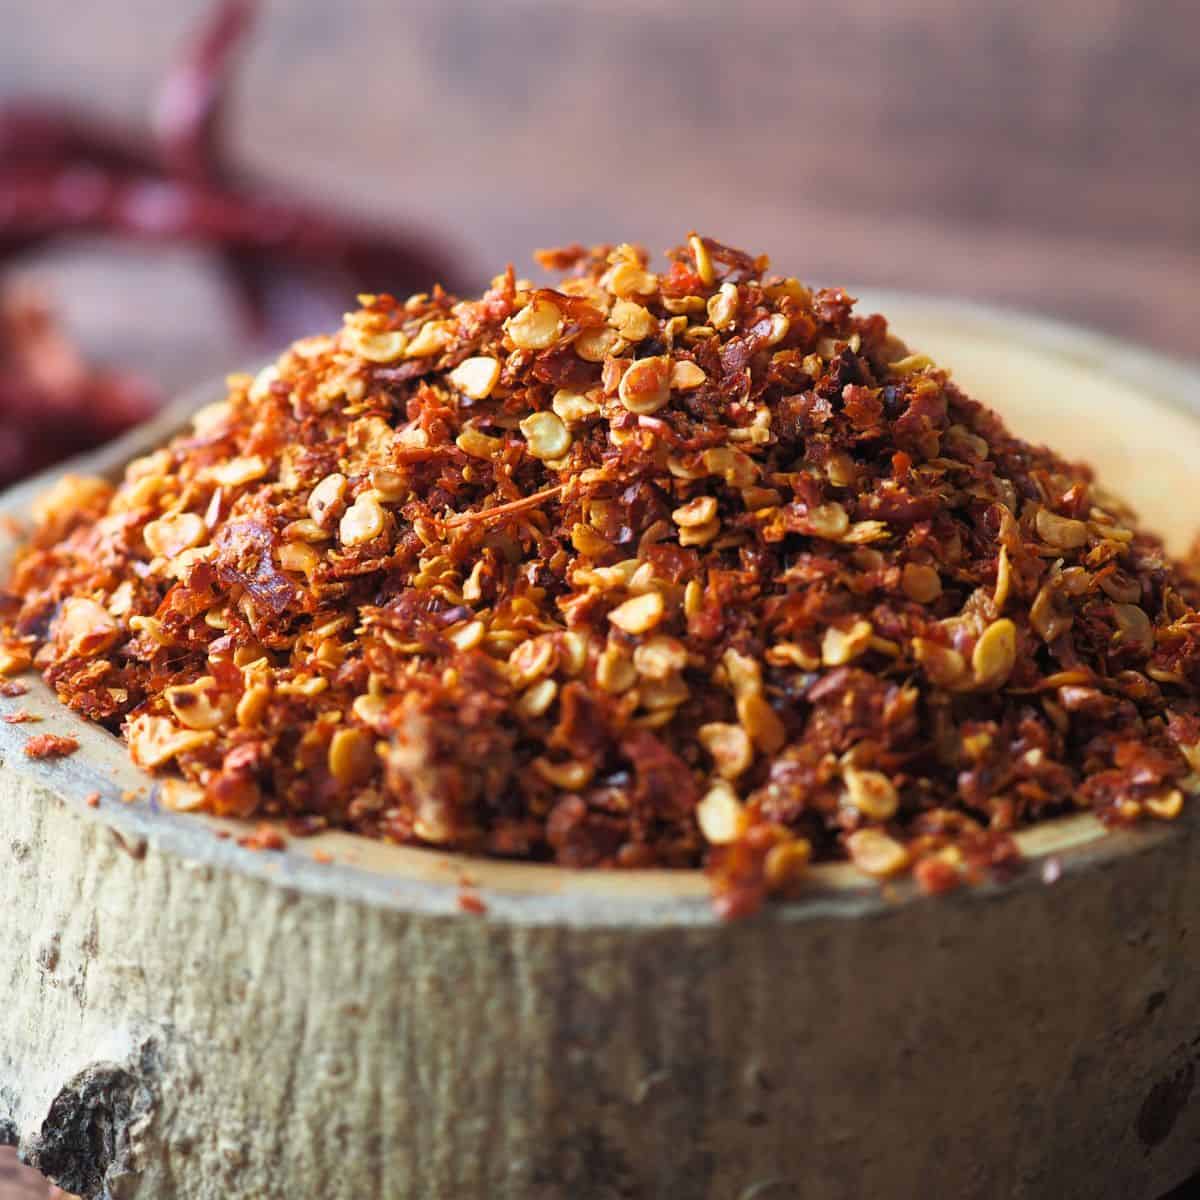 a pile of roasted chili flakes